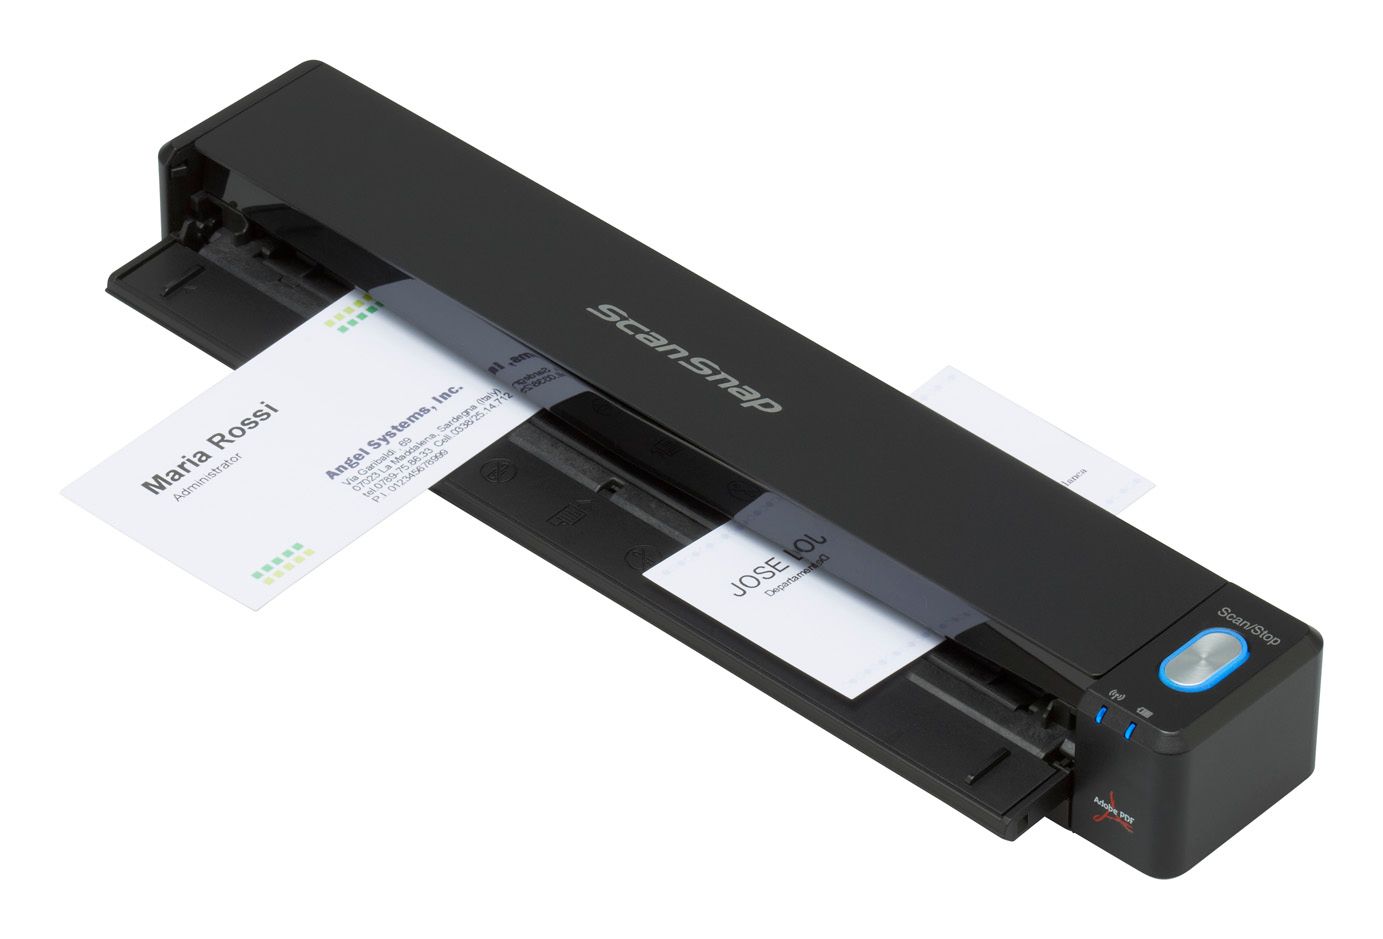 Fujitsu ix100: The lightest portable wireless document scanner for your phone